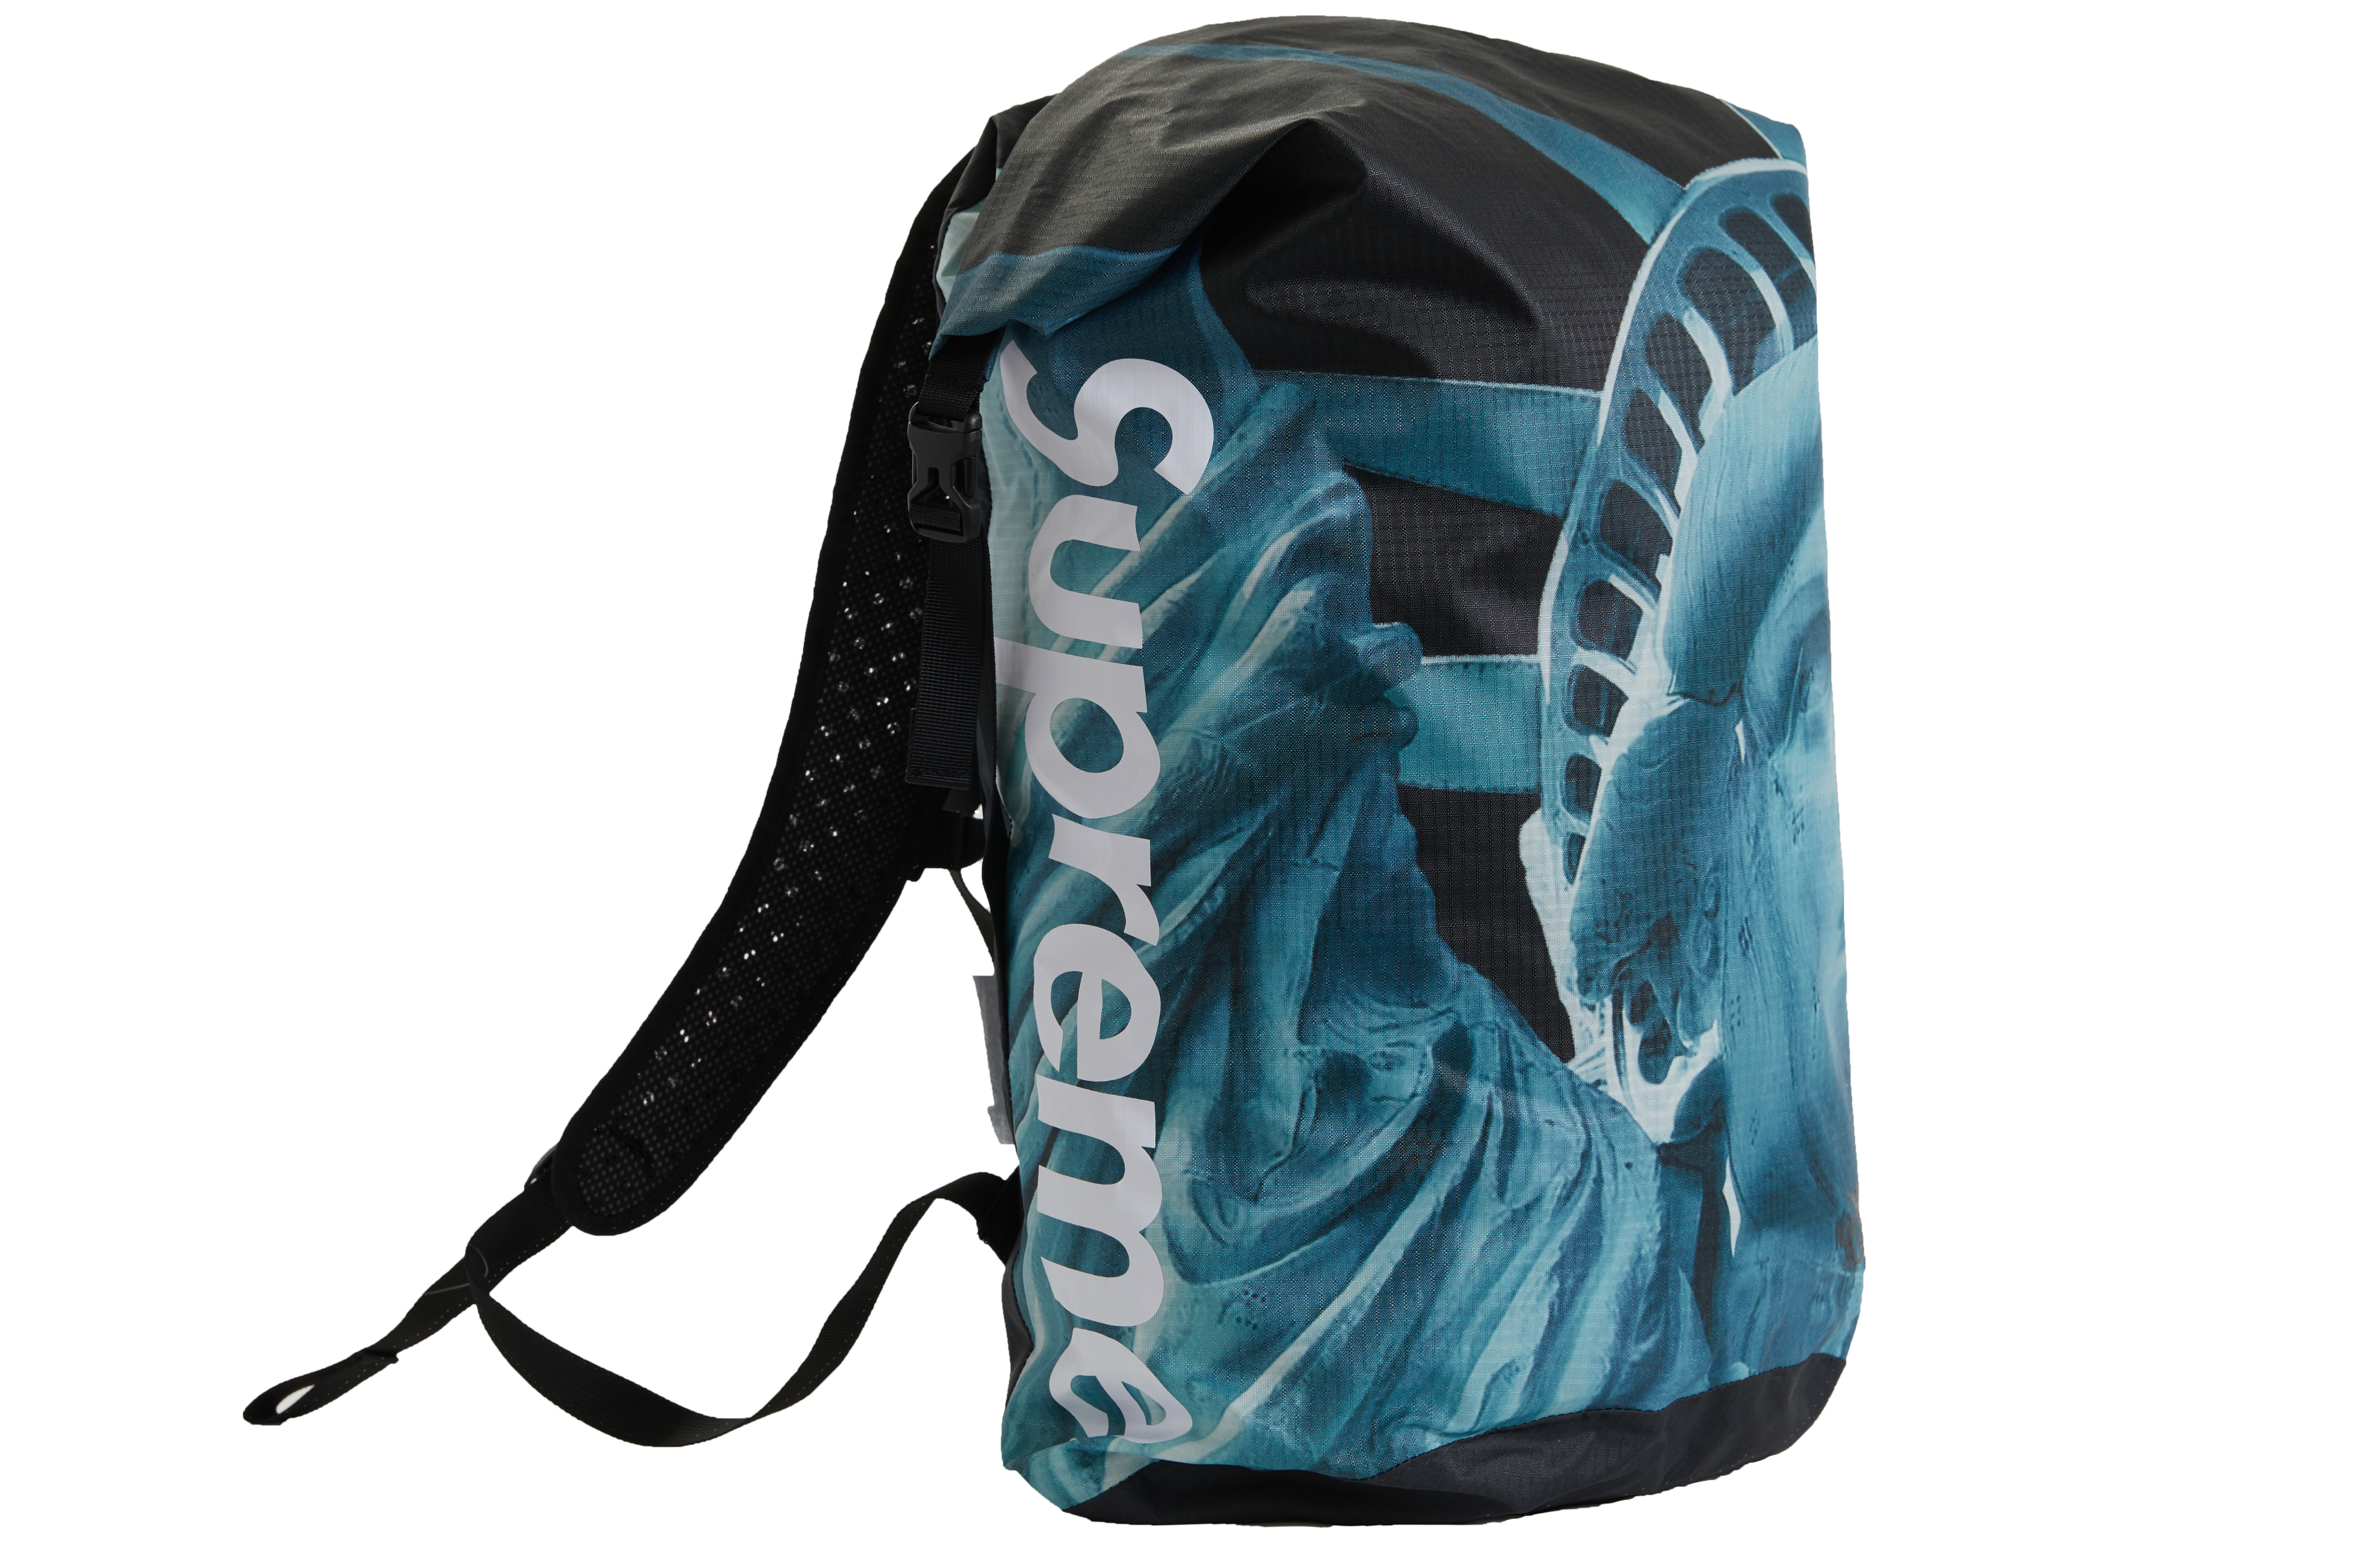 Supreme x The North Face Statue of Liberty Waterproof Backpack